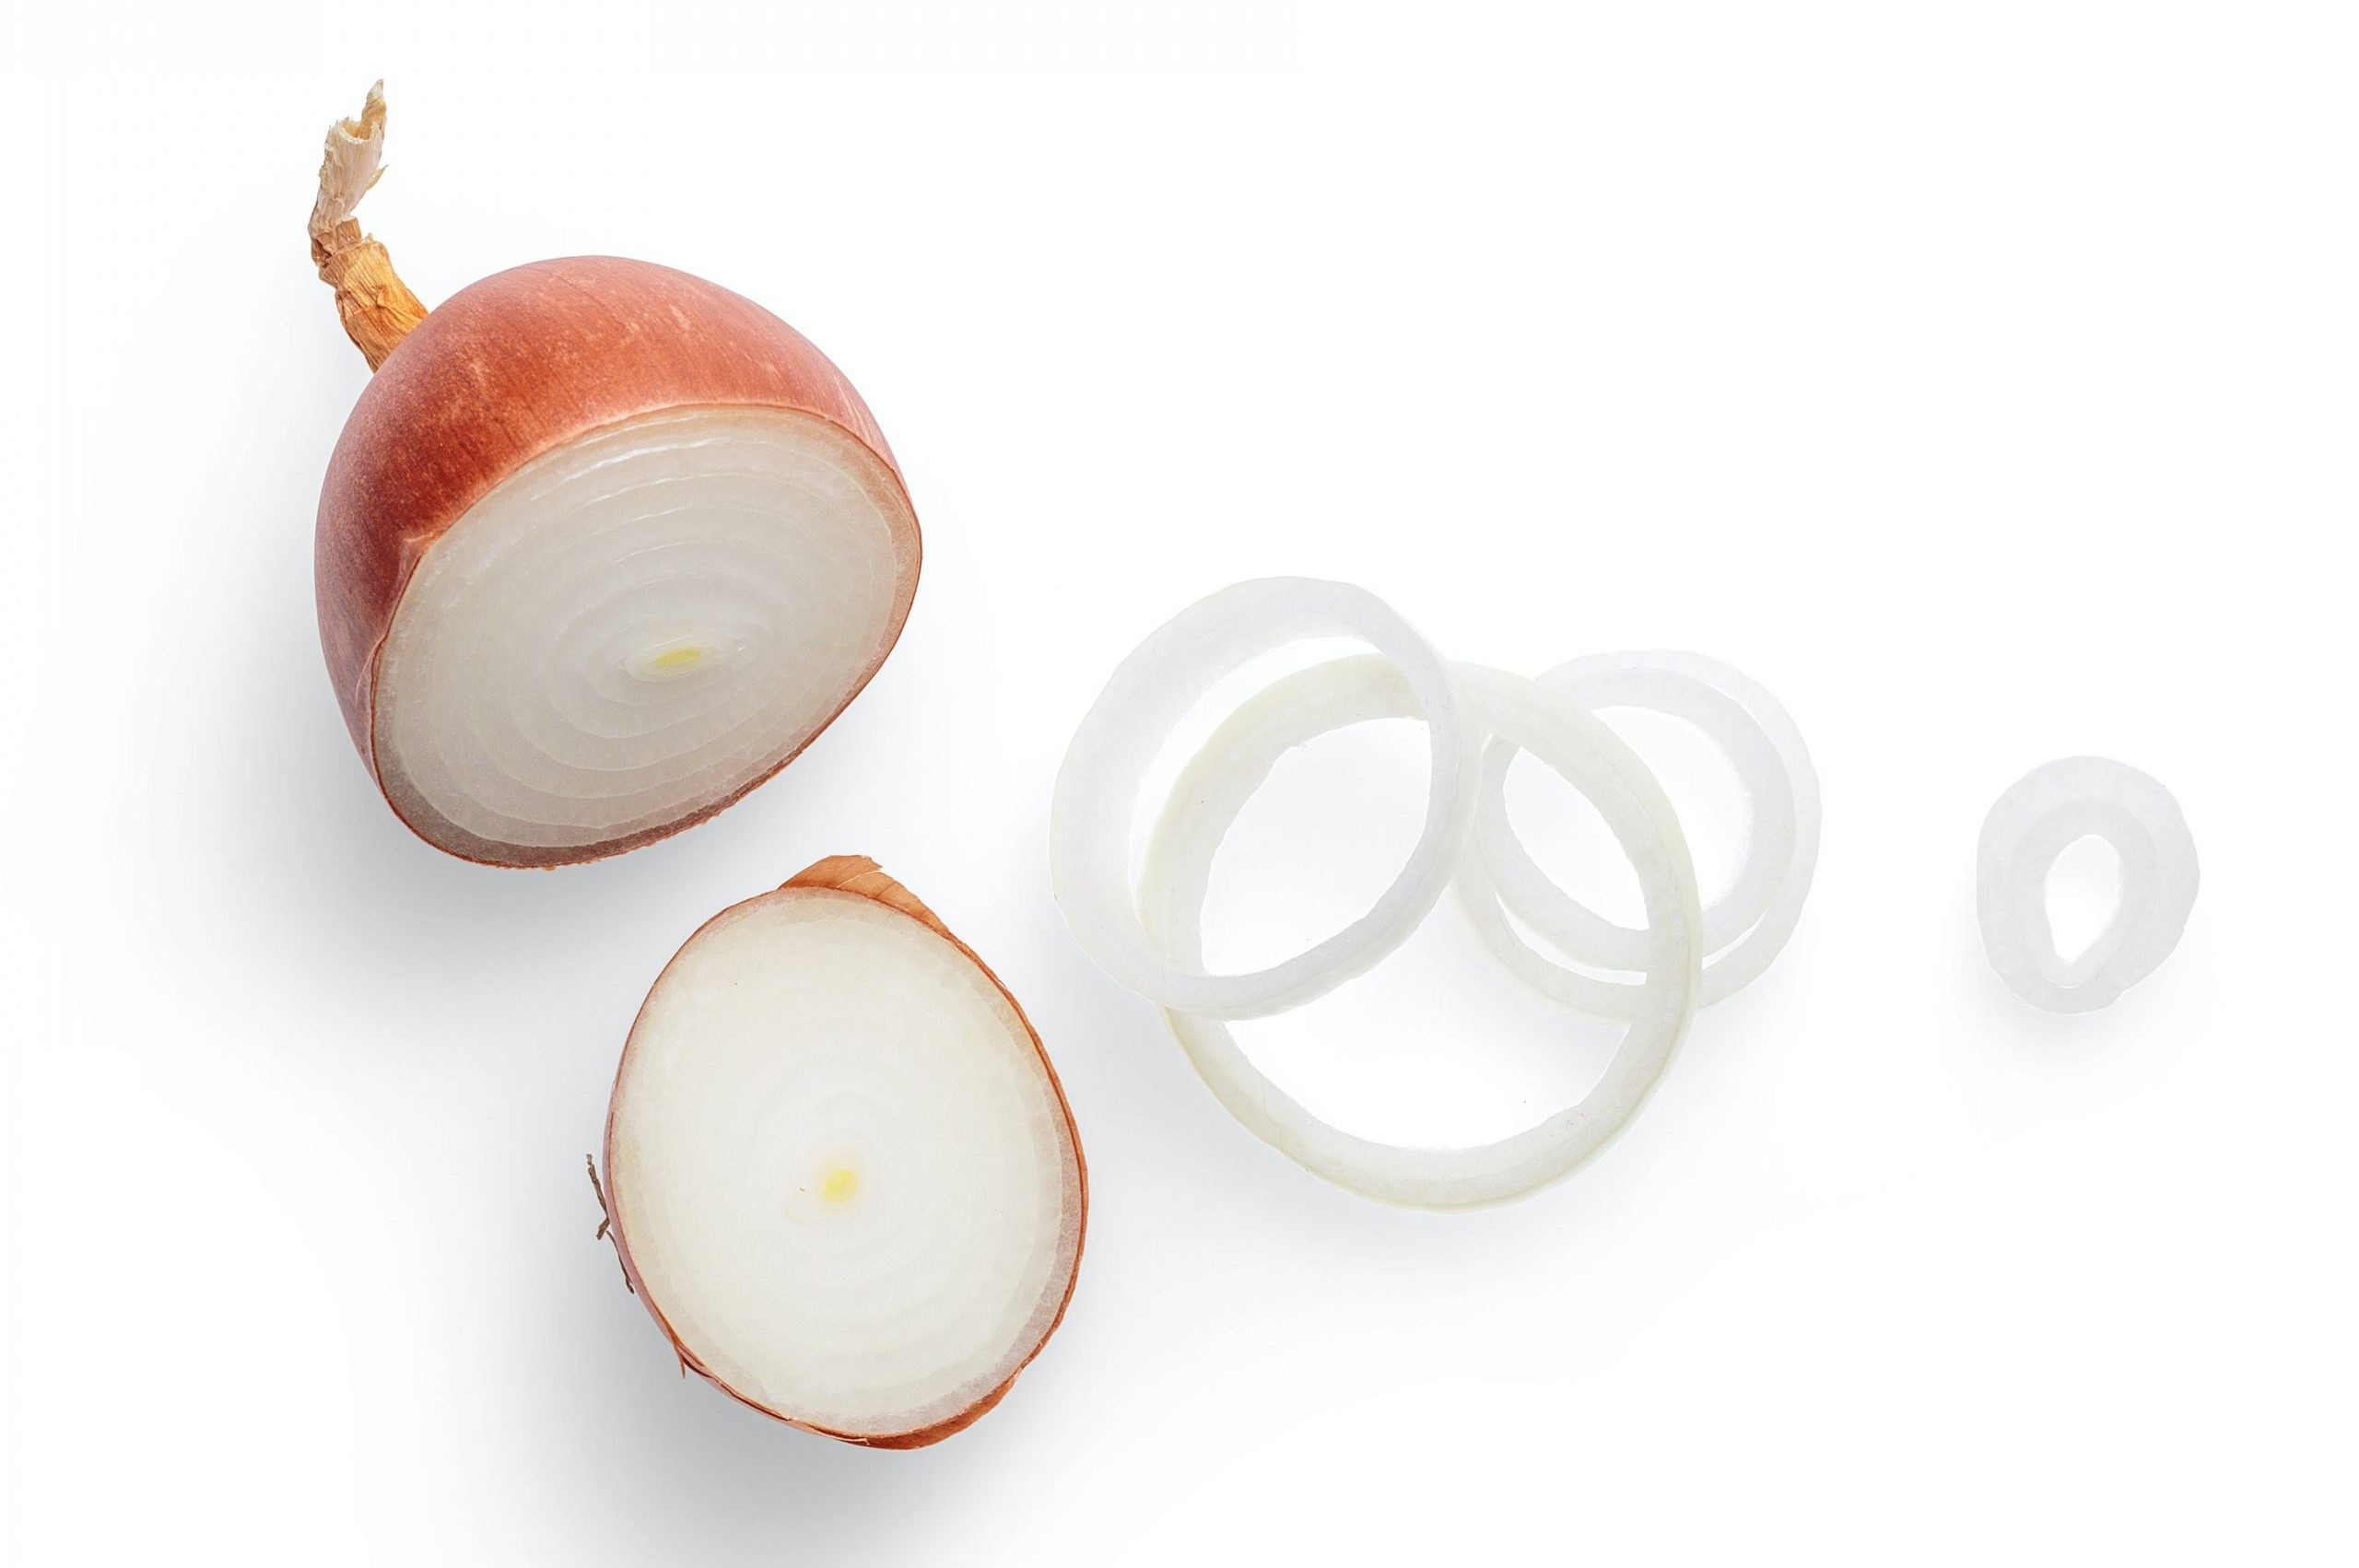 Sliced white onion. The outermost layers are often discarded during food preparation, yet contain the most antioxidants.